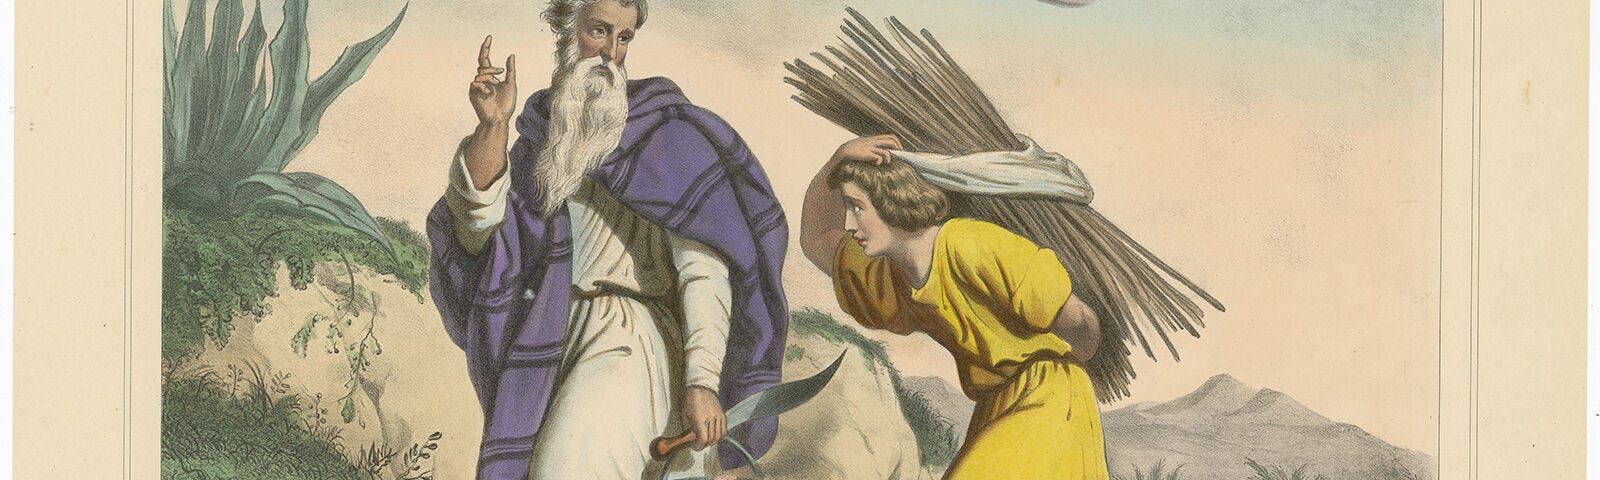 Old hand-colored print of Abraham walking with his son, Isaac toward the place of sacrifice.